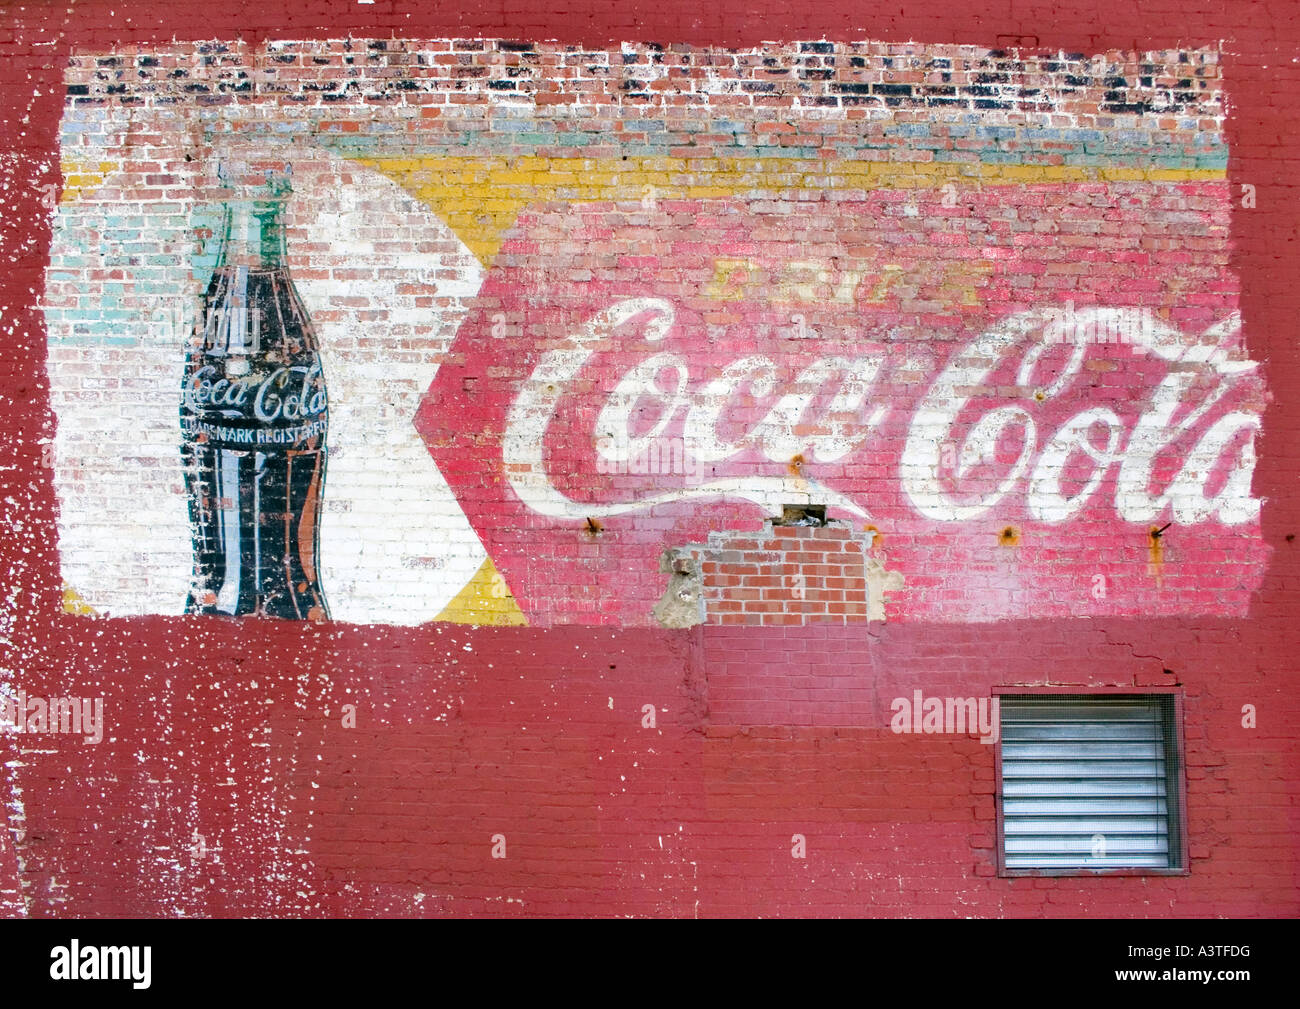 Old Coca Cola advertisement painted on a brick wall in Staunton Virginia Stock Photo